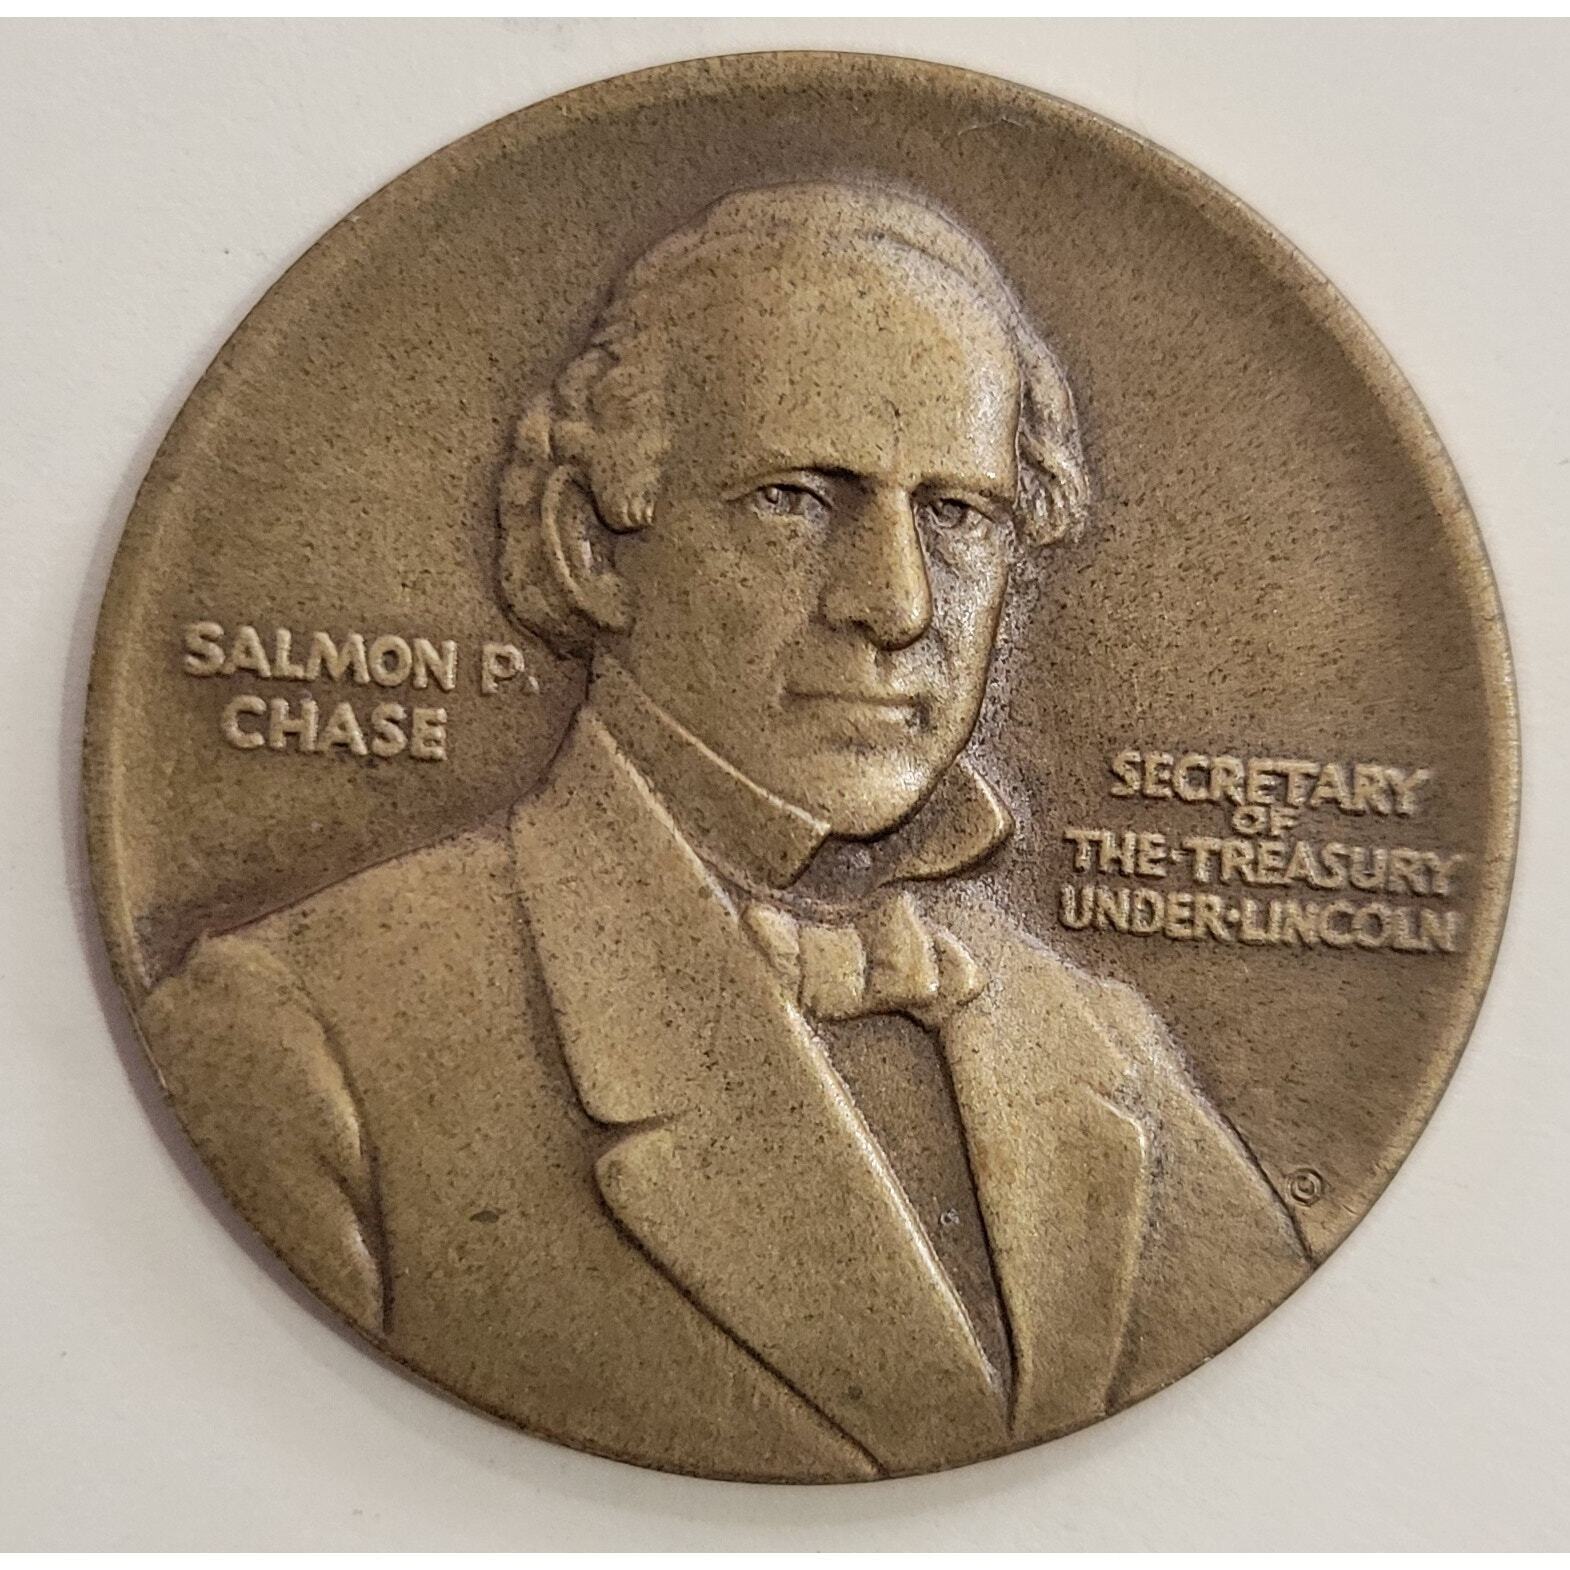 Vintage Salmon P Chase. Chase National Bank Token. Sec of Treasury under Lincoln